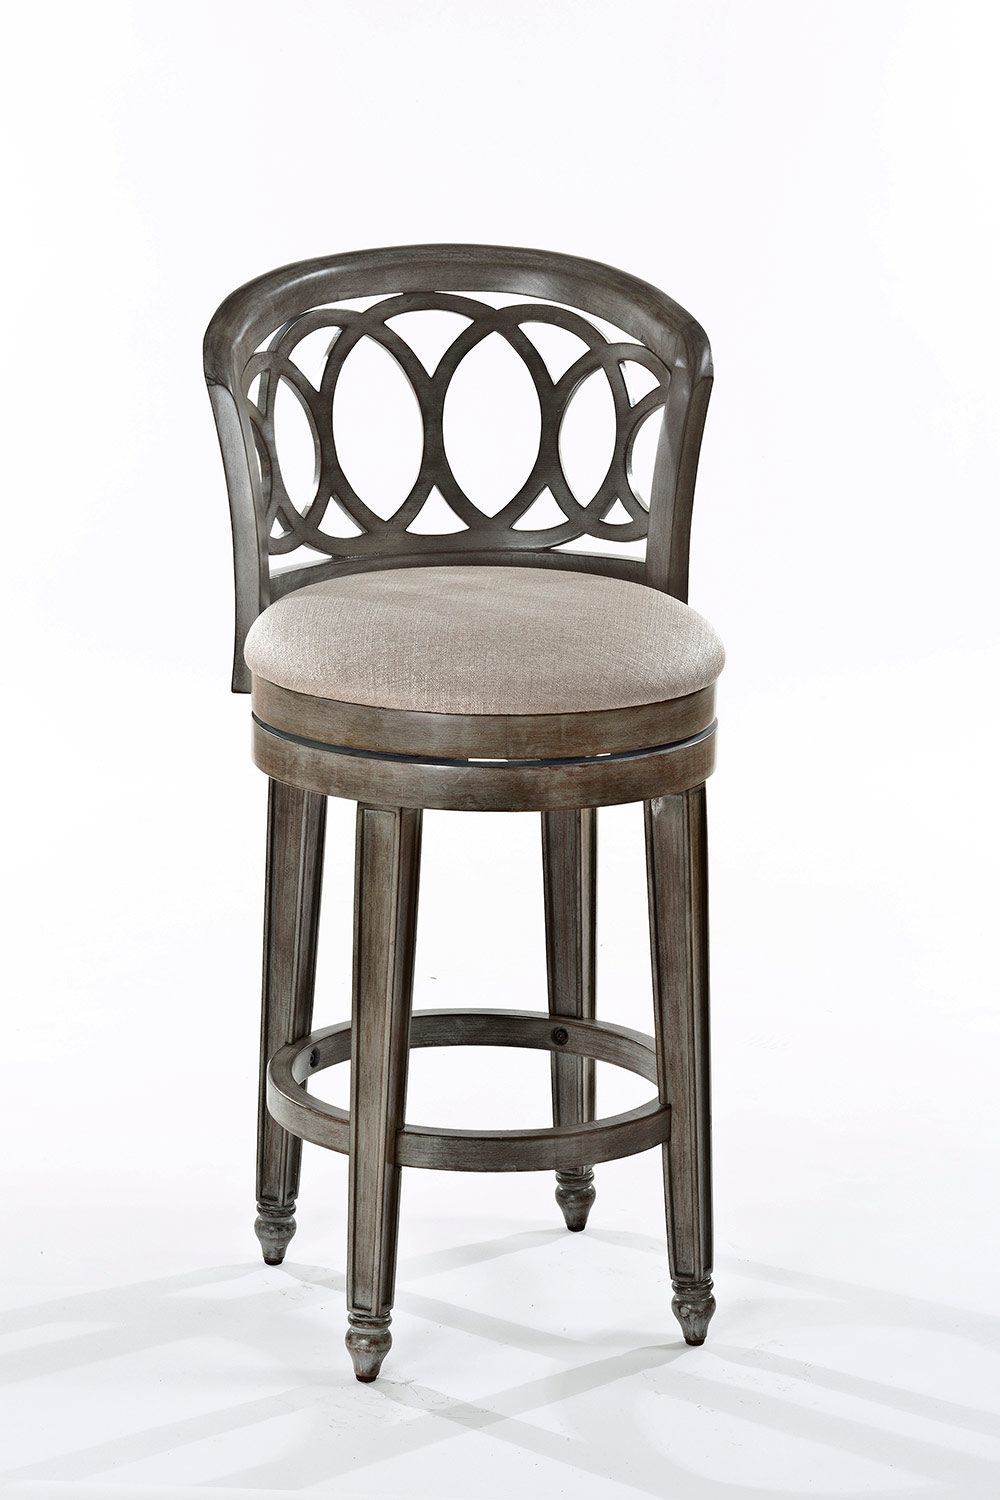 Hillsdale Adelyn Swivel Counter Stool - Gold Metallic Silver - Putty Fabric